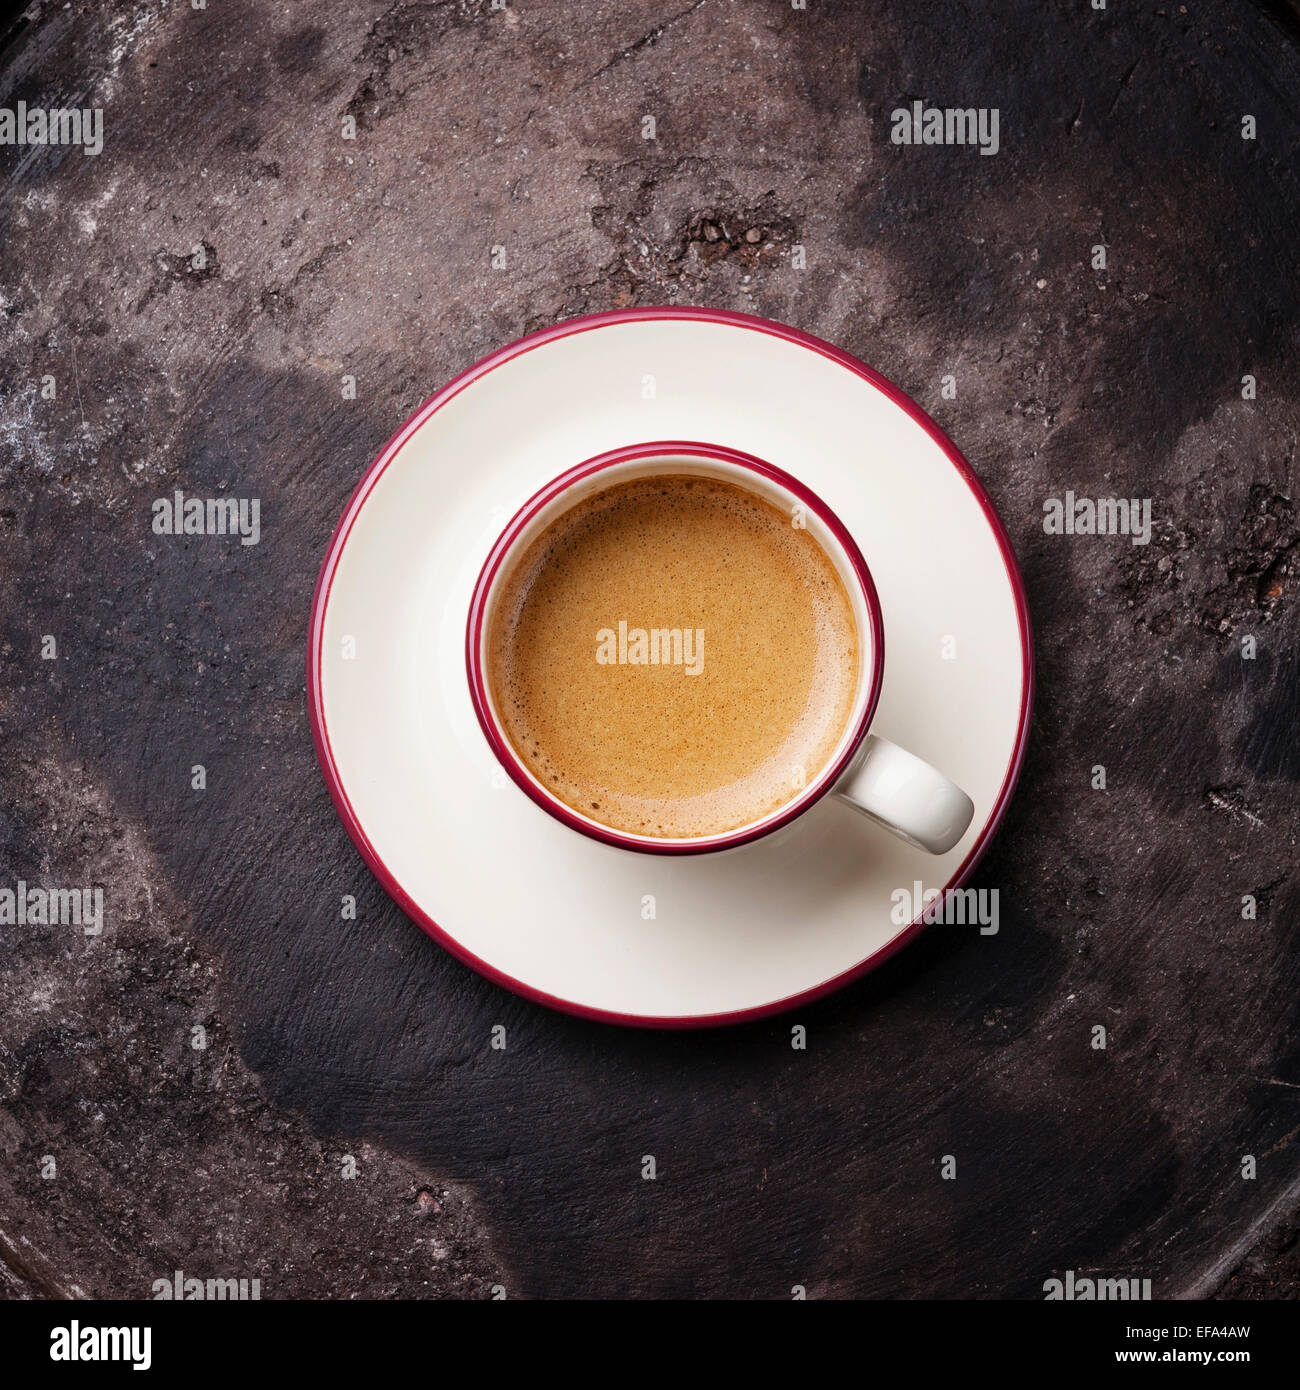 Coffee cup on dark textured background Stock Photo